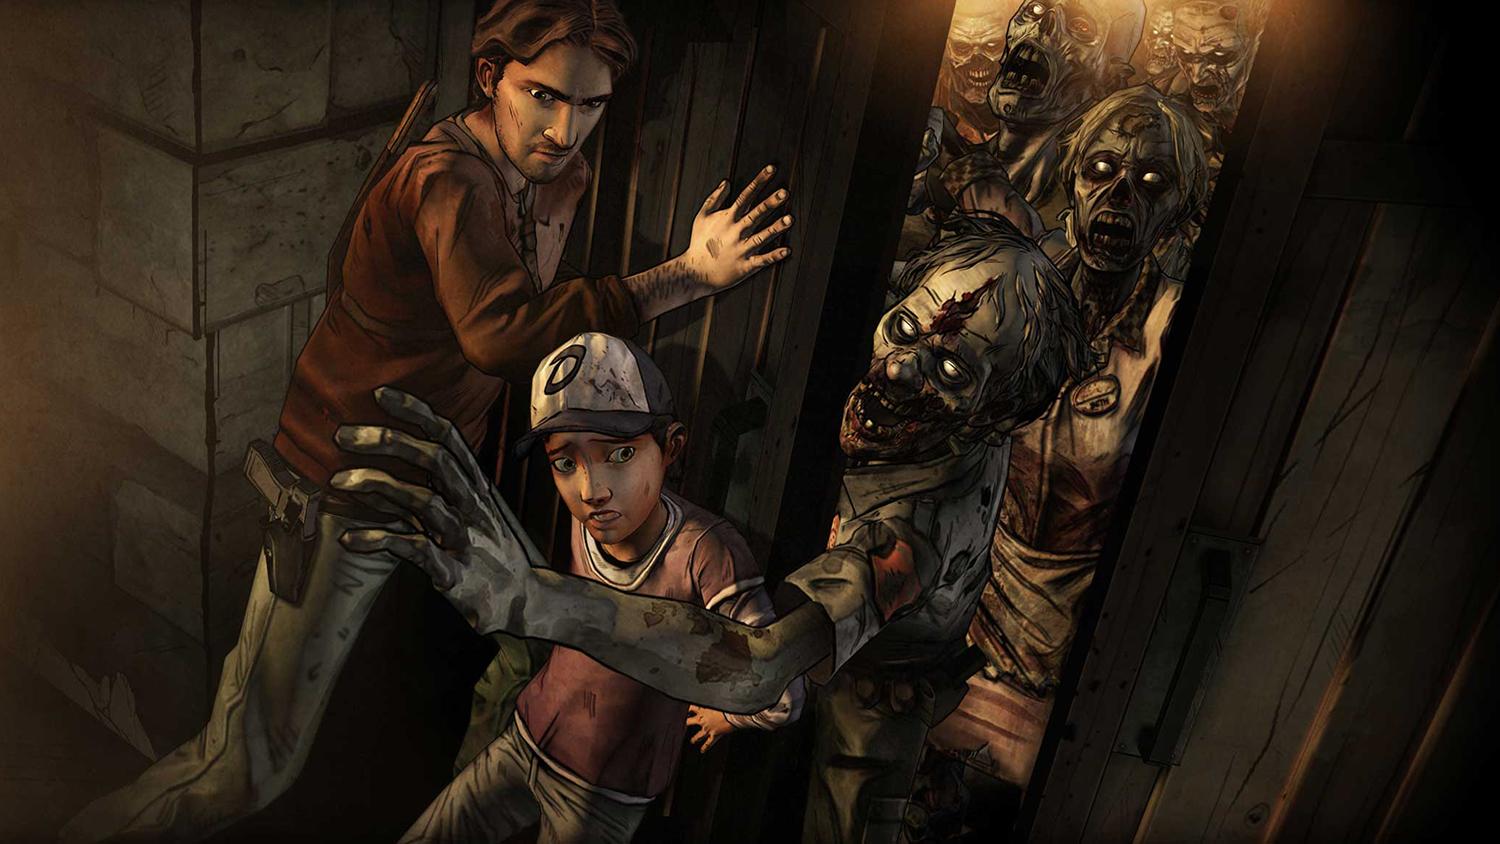 GTA 5 turns into The Walking Dead with spooky zombie apocalypse